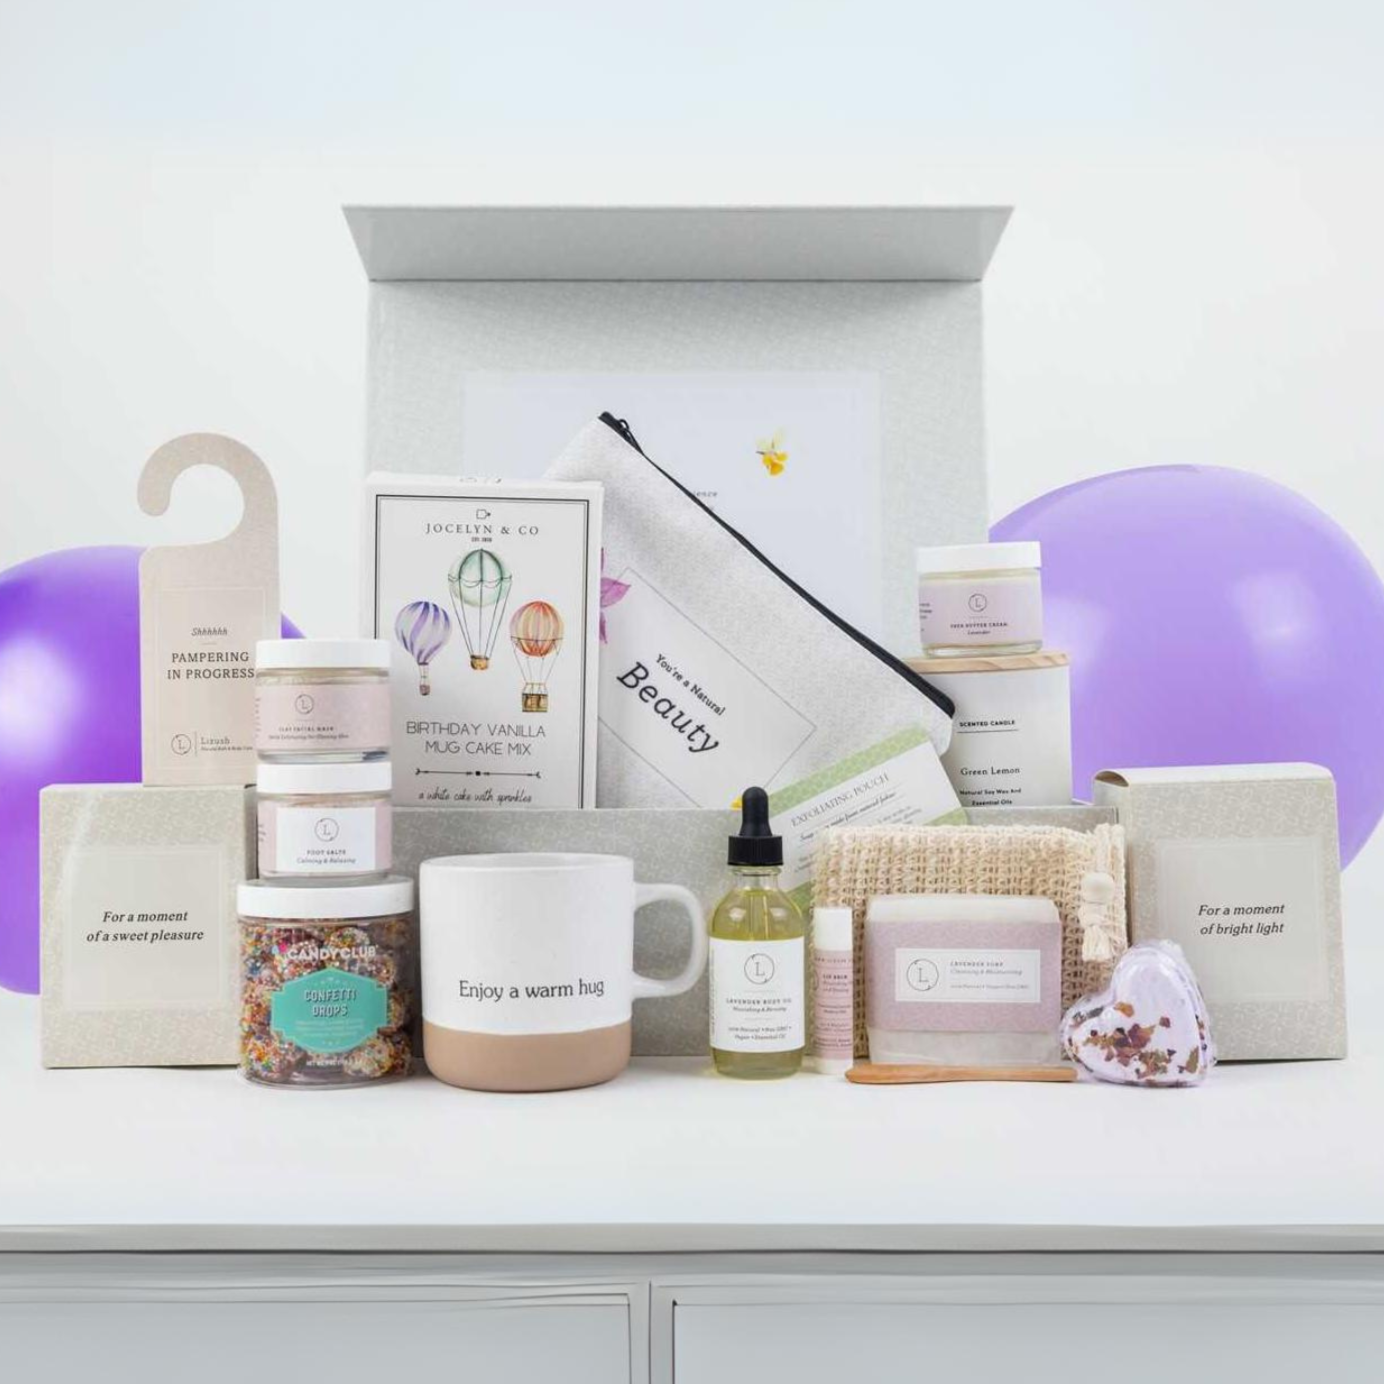 Relaxation Oasis Birthday Gift Box